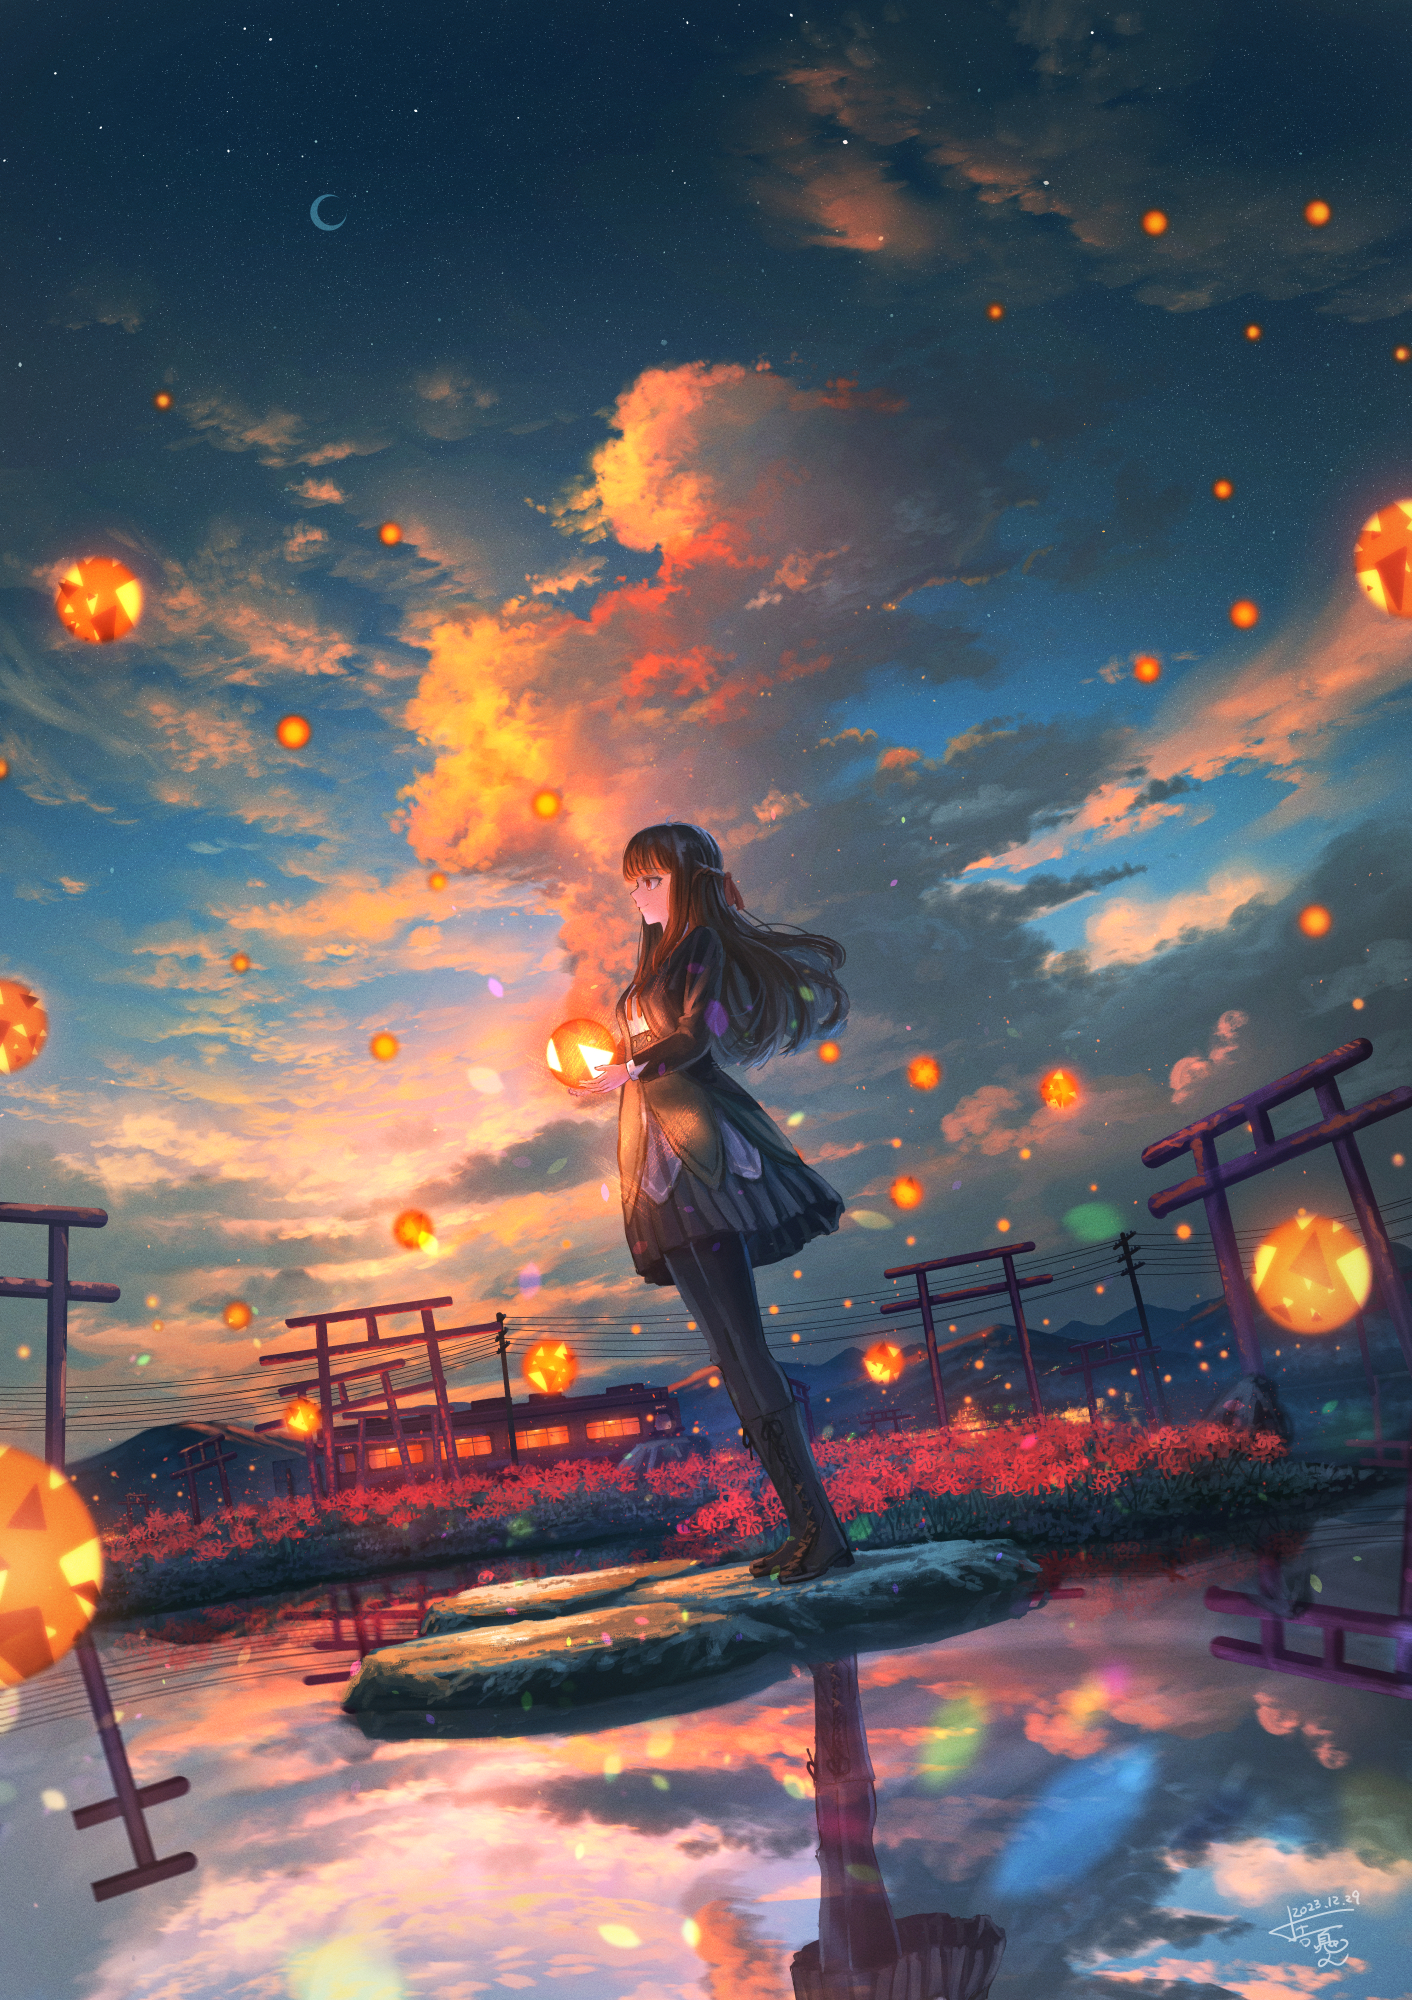 Anime 1412x2000 Shuu Illust anime girls black hair crescent moon women outdoors long hair sunset spider lilies pantyhose signature power lines reflection clouds gems sky portrait display evening flowers starred sky